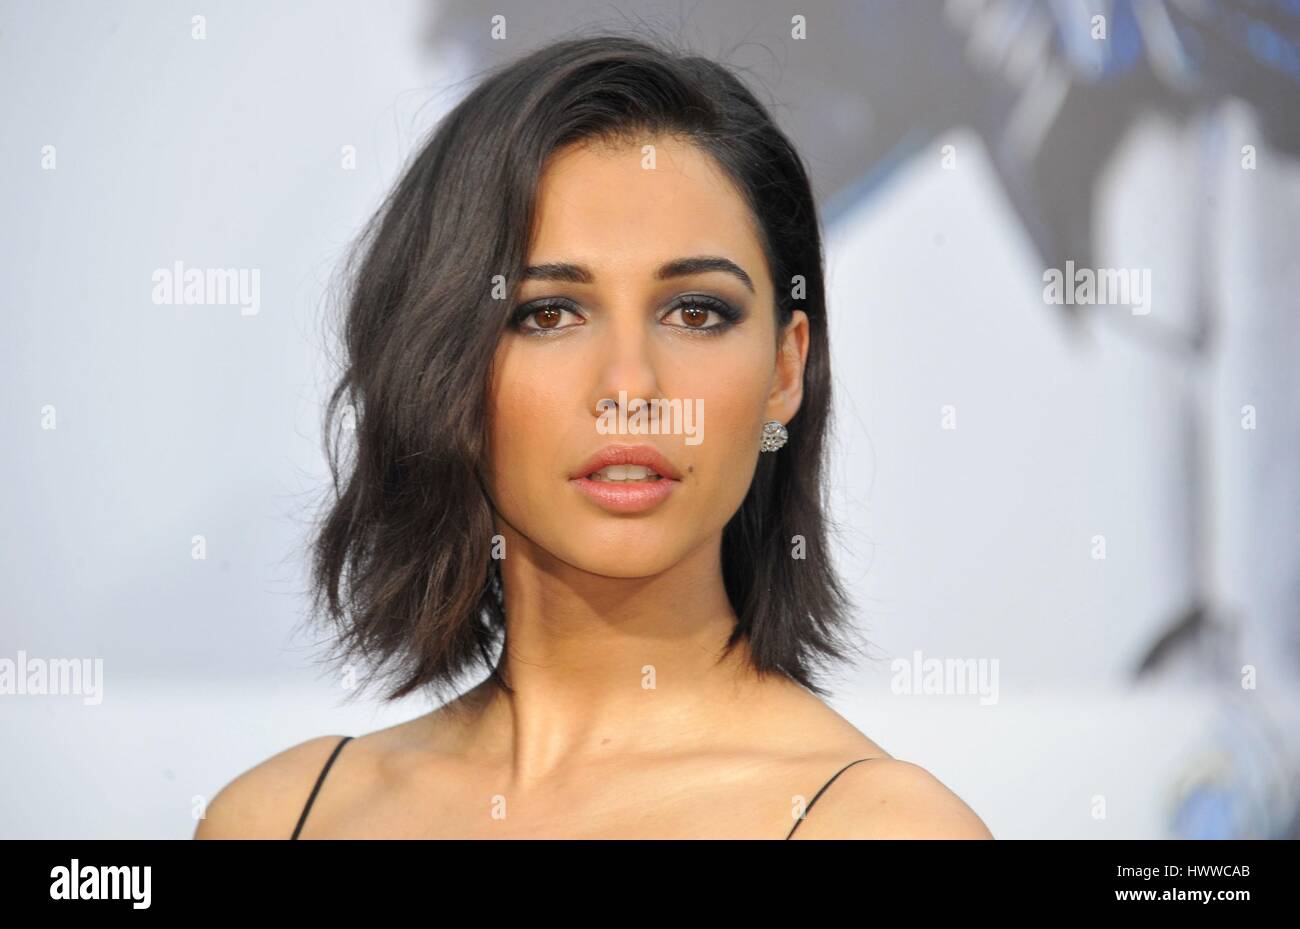 Los Angeles, California, USA. 22nd Mar, 2017. Naomi Scott at arrivals for SABAN'S POWER RANGERS Premiere, Regency Westwood Village Theatre, Los Angeles, CA March 22, 2017. Credit: Dee Cercone/Everett Collection/Alamy Live News Stock Photo